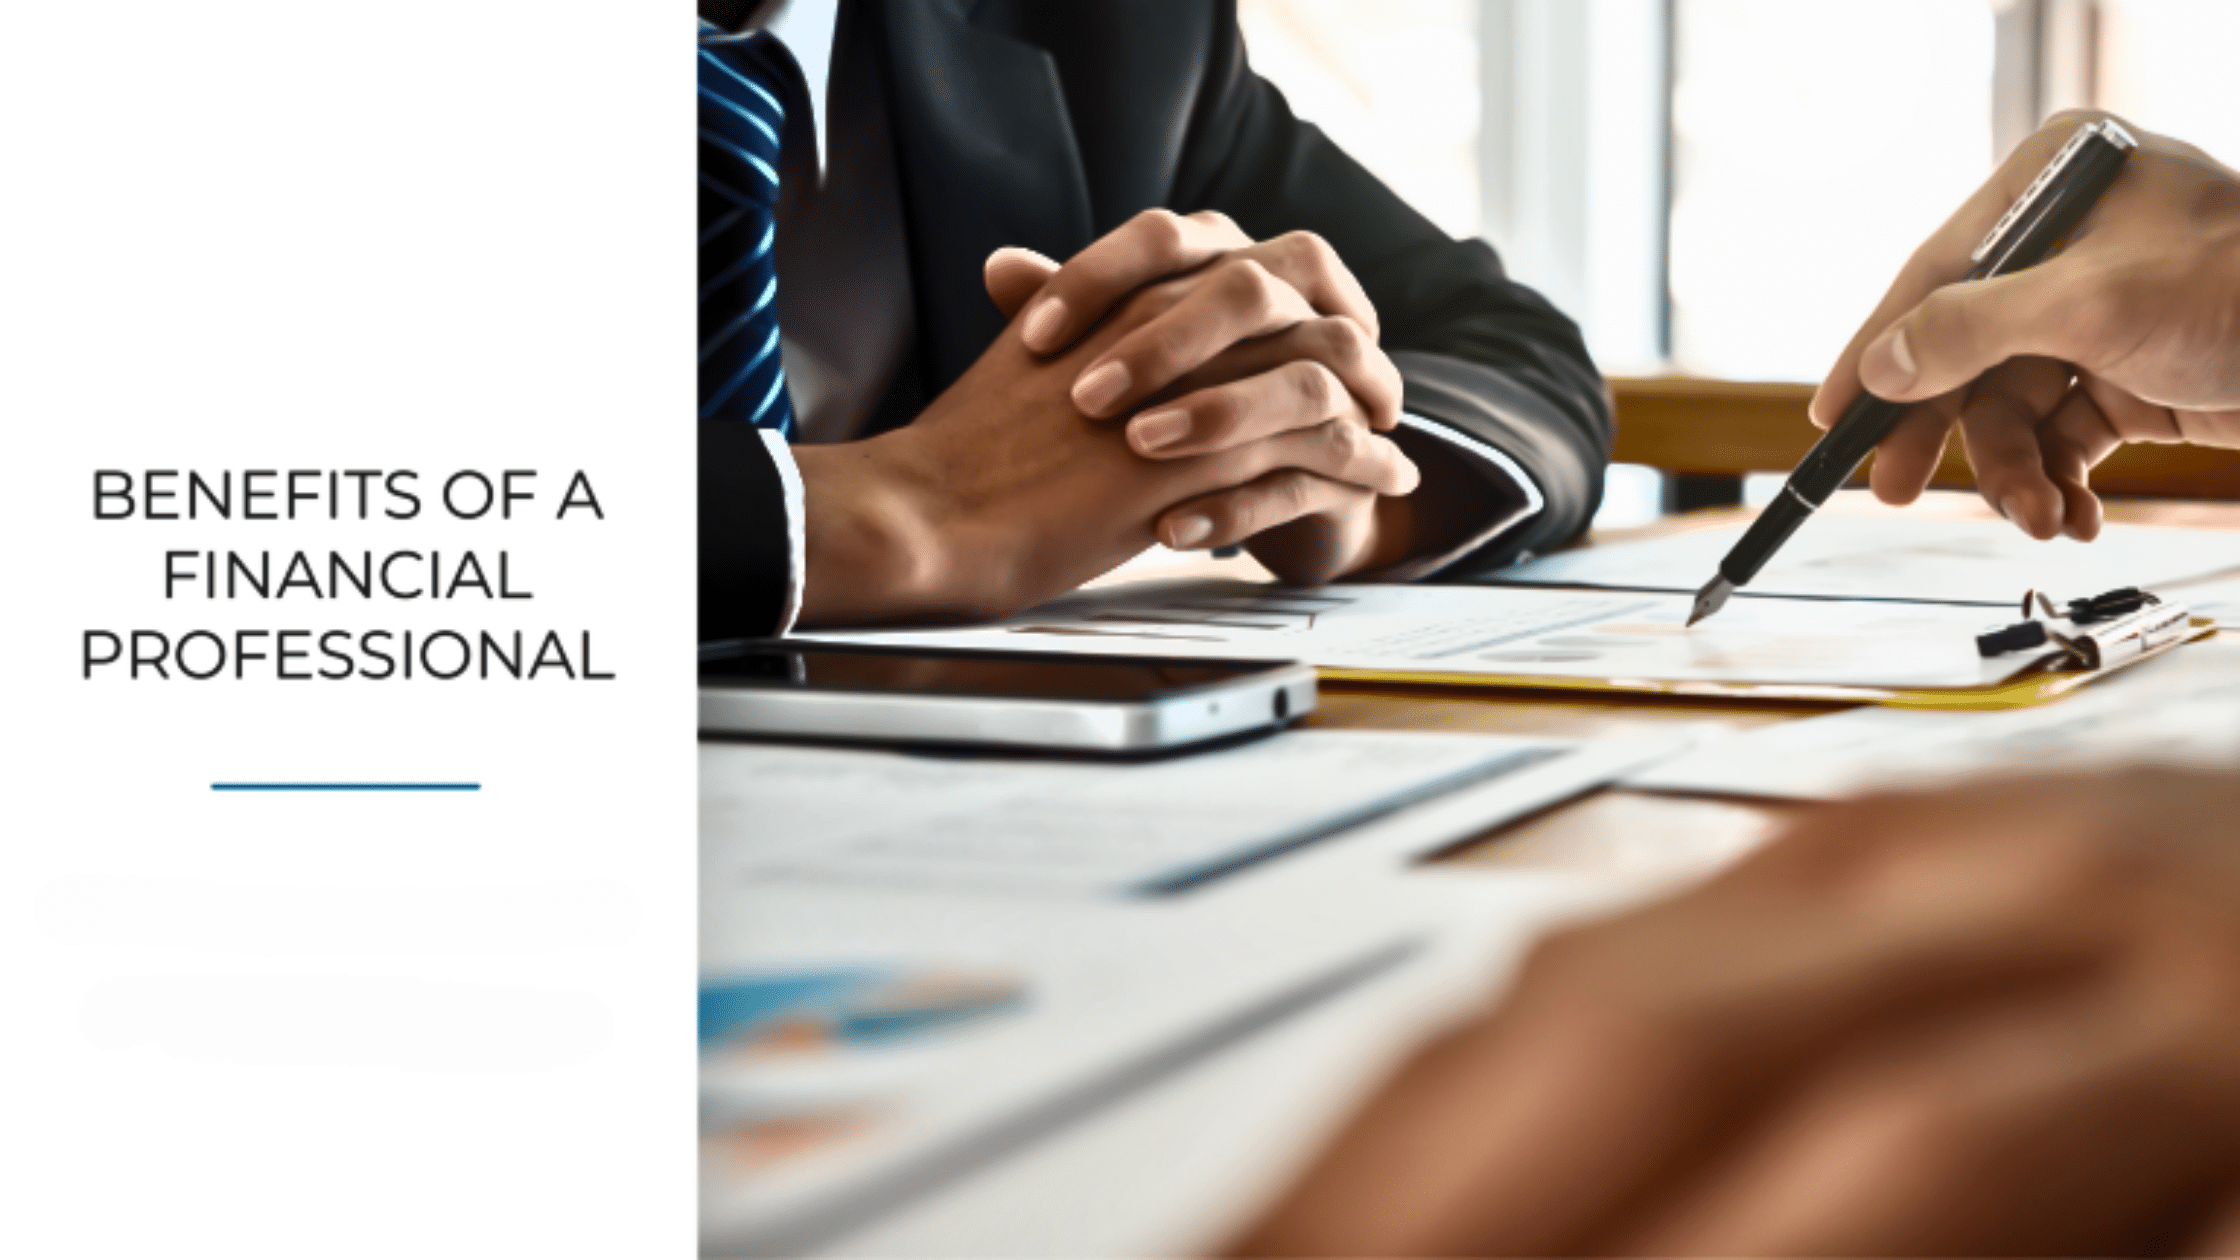 Key Benefits of a Financial Professional